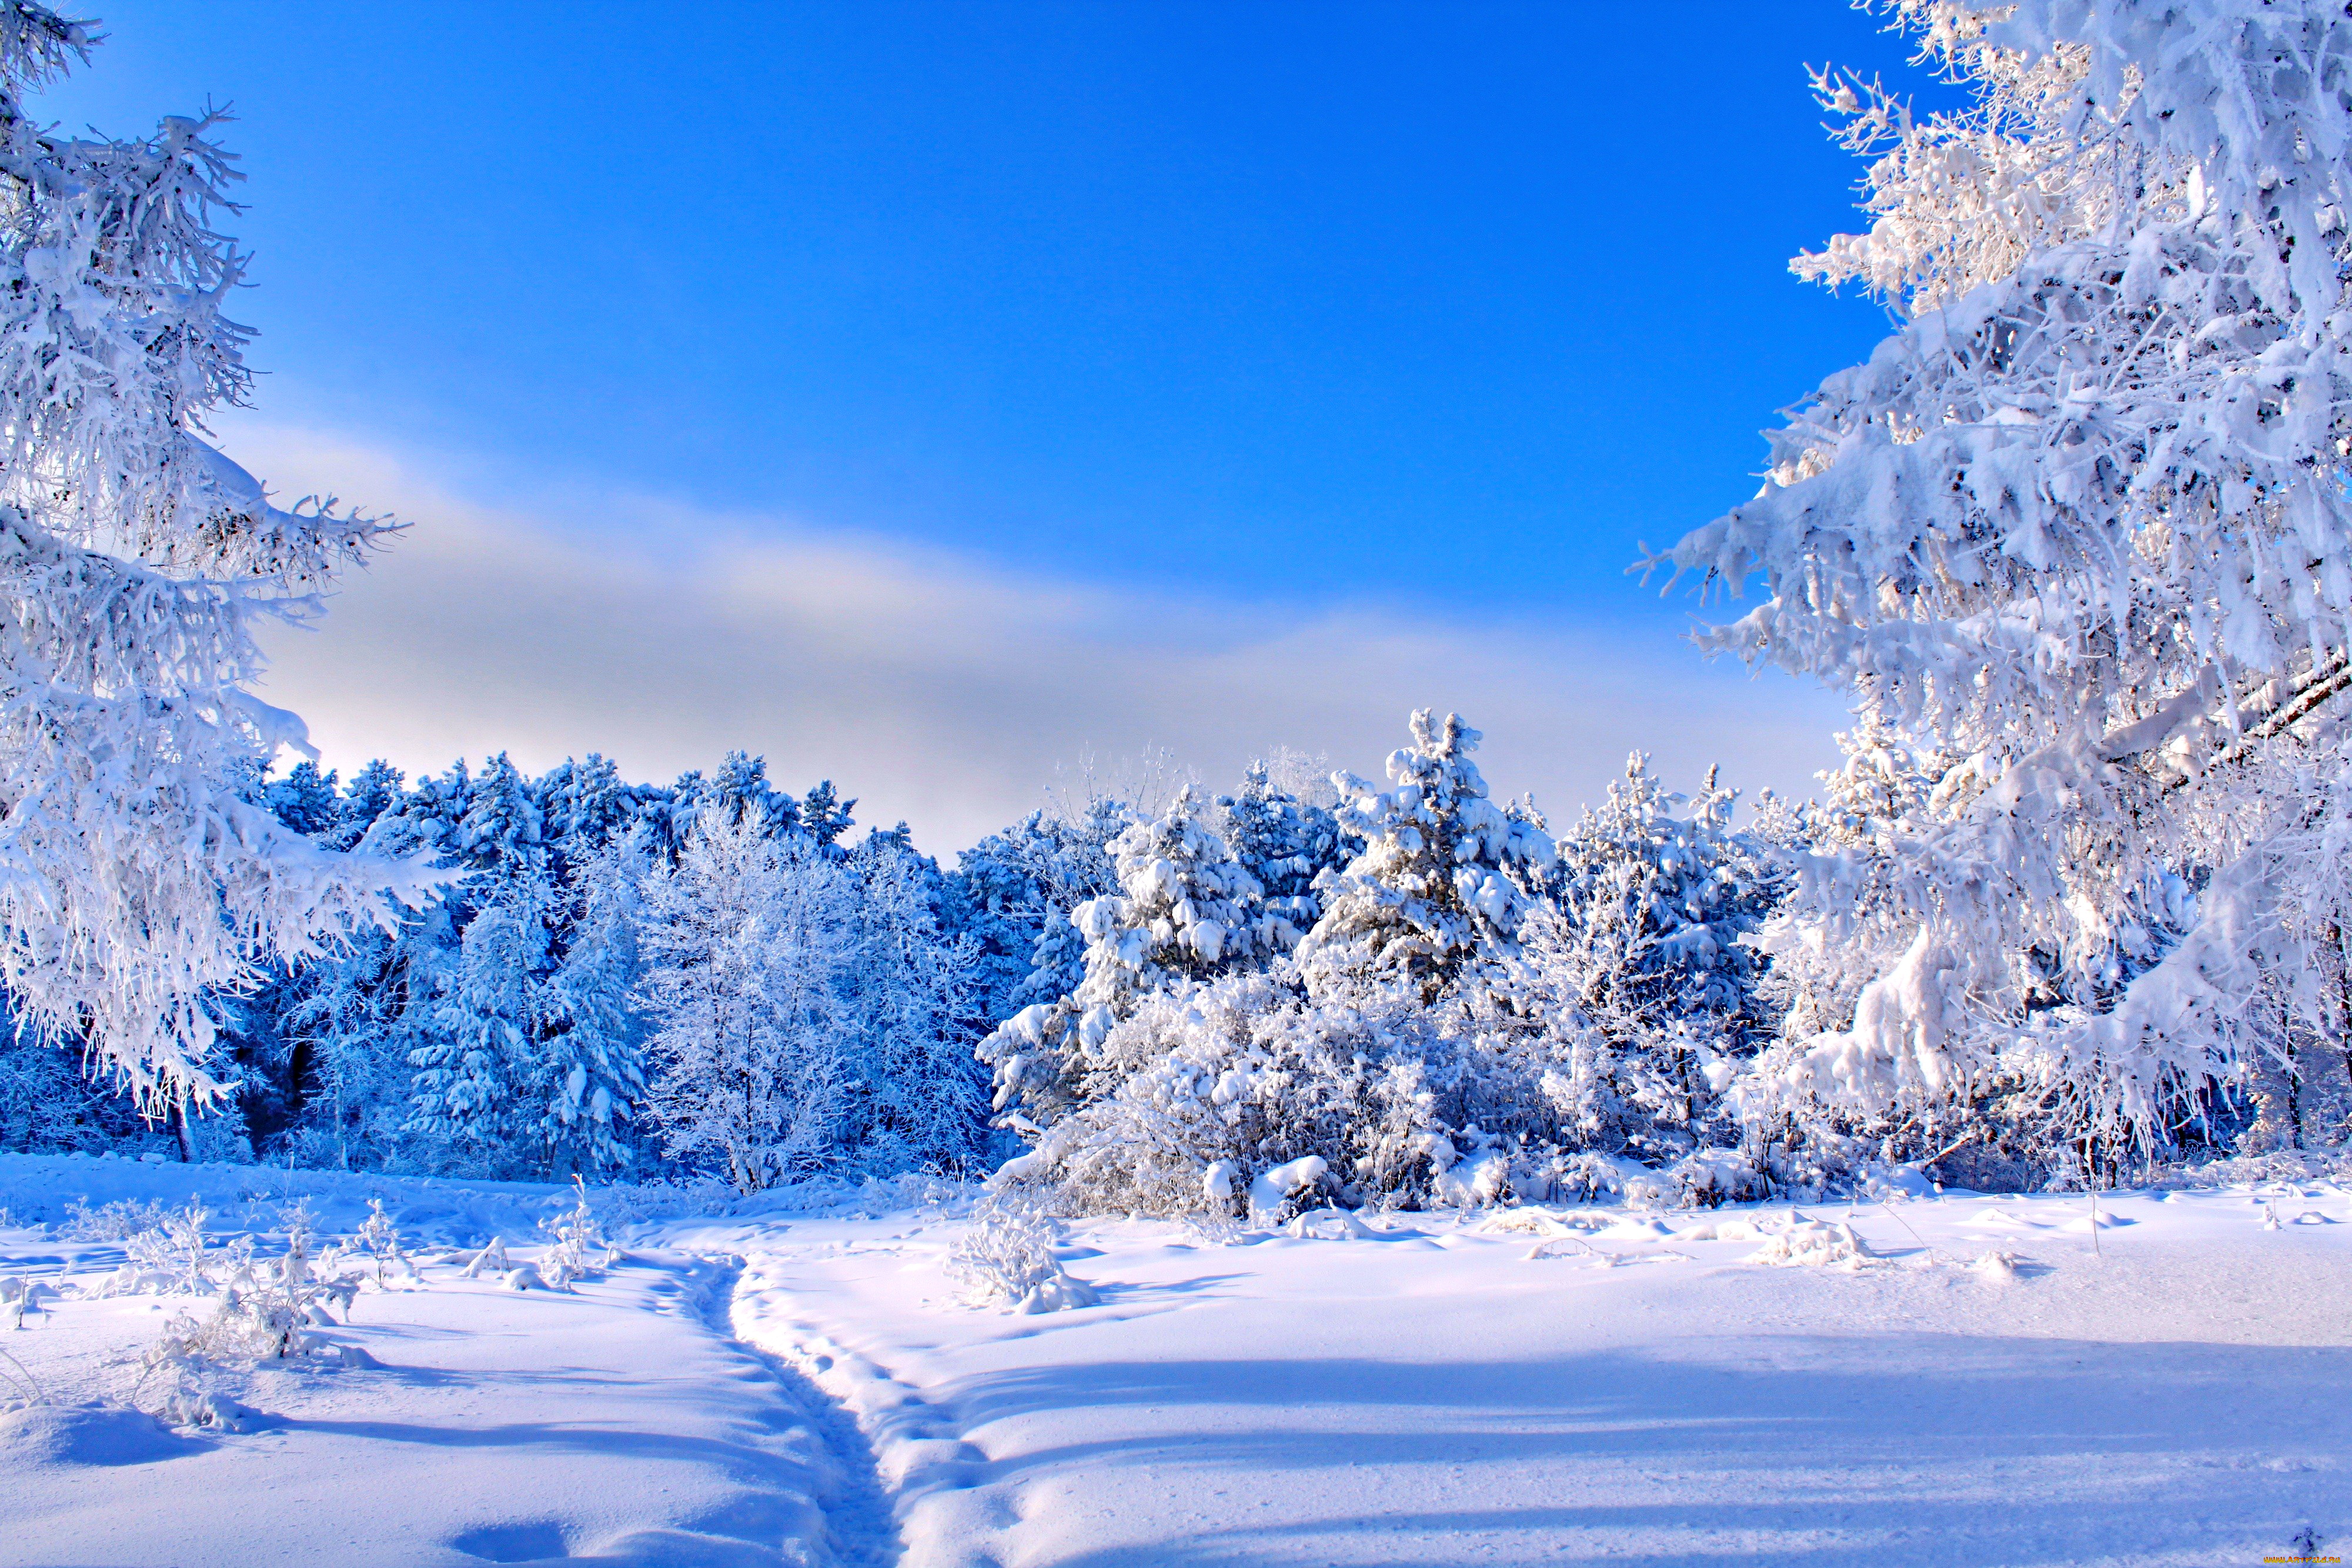 Free download download Sunny winter day wallpaper ForWallpapercom